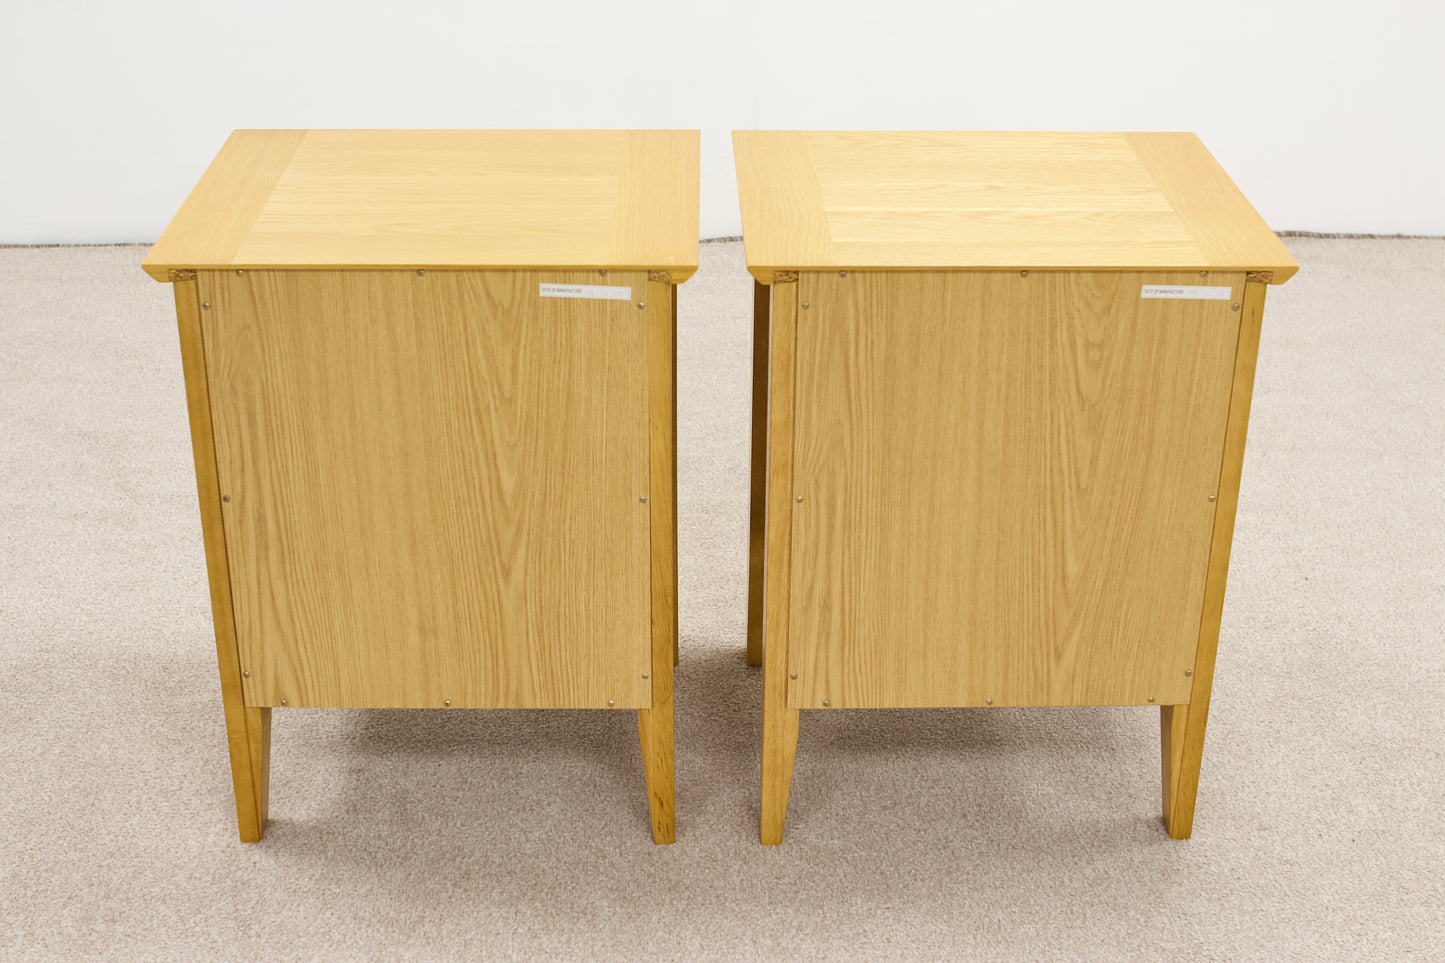 Matching Bedside Cabinets